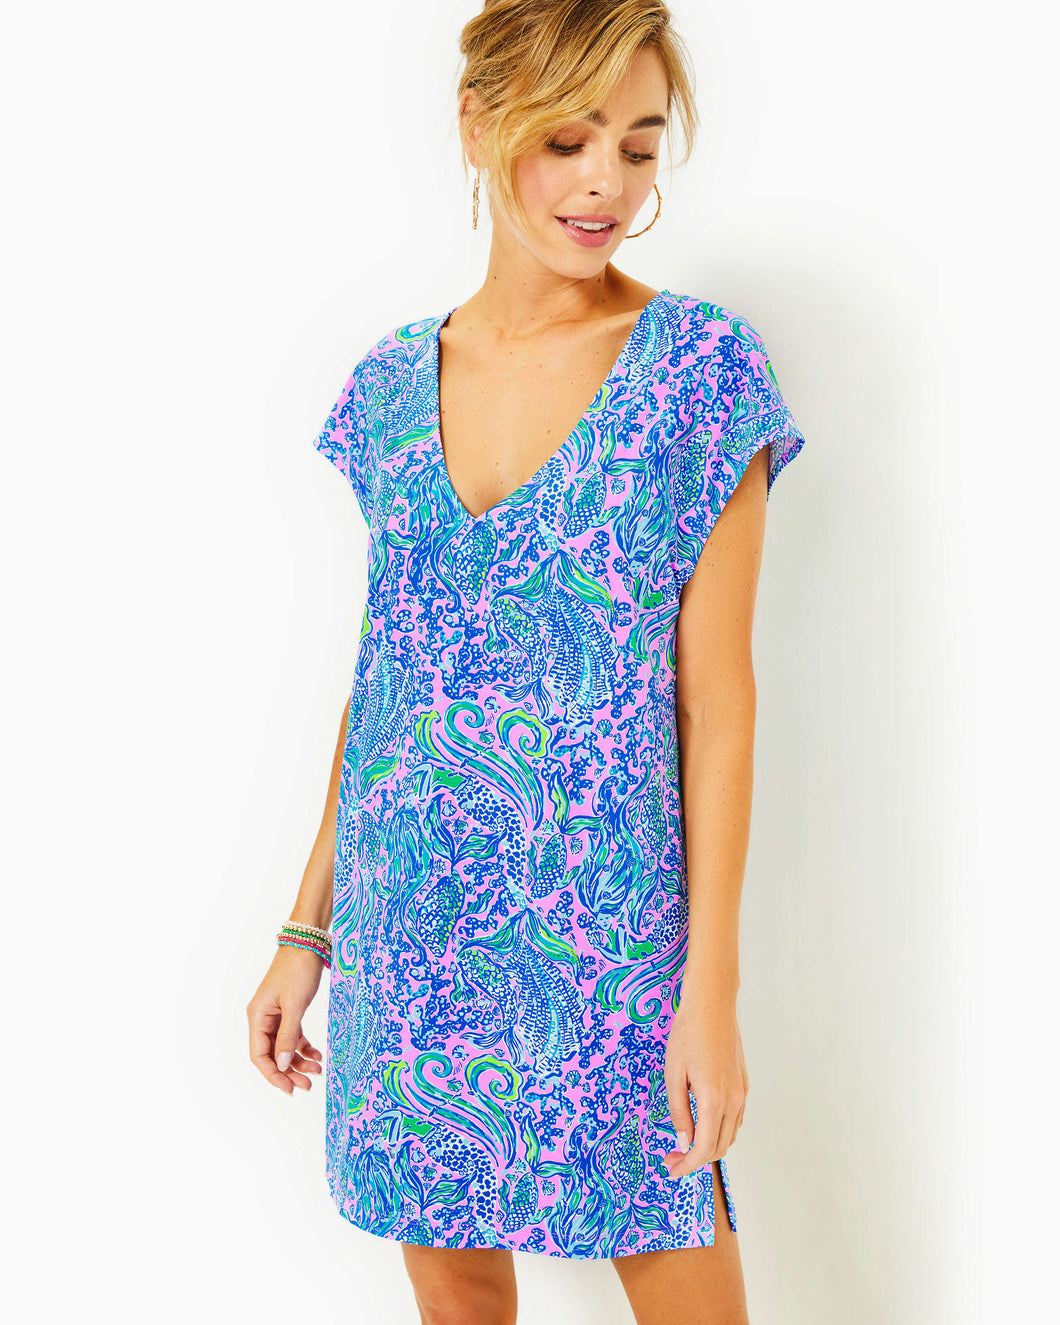 Talli Cover-Up - Lilac Rose We Mermaid It